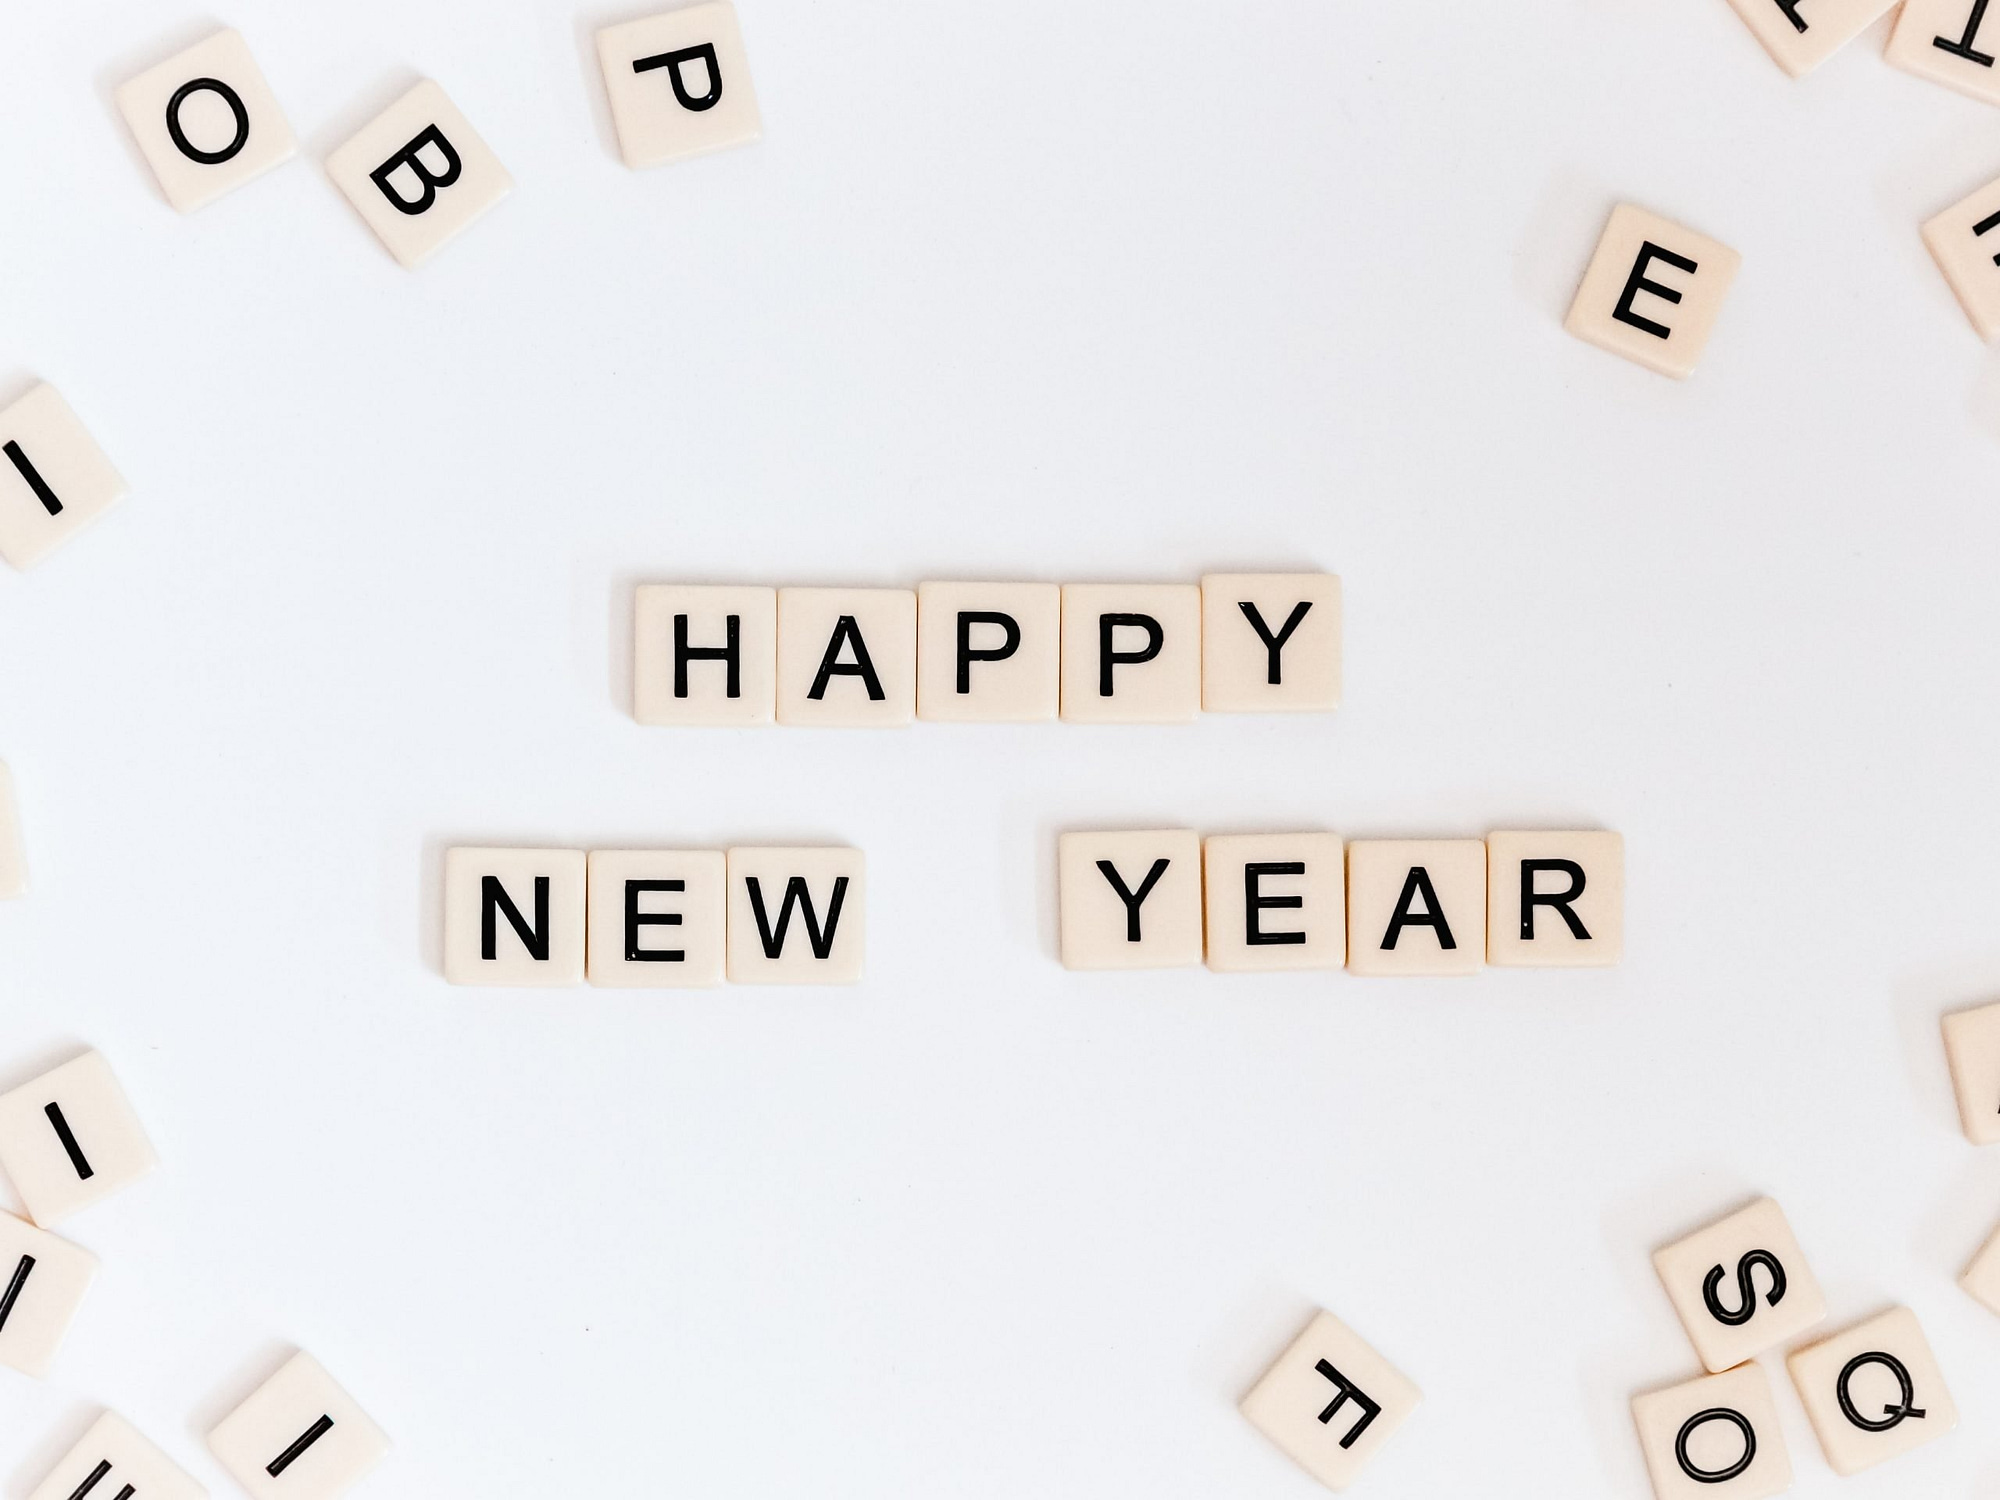 Why Include Digital Marketing as One of Your Business’s New Year’s Resolutions?